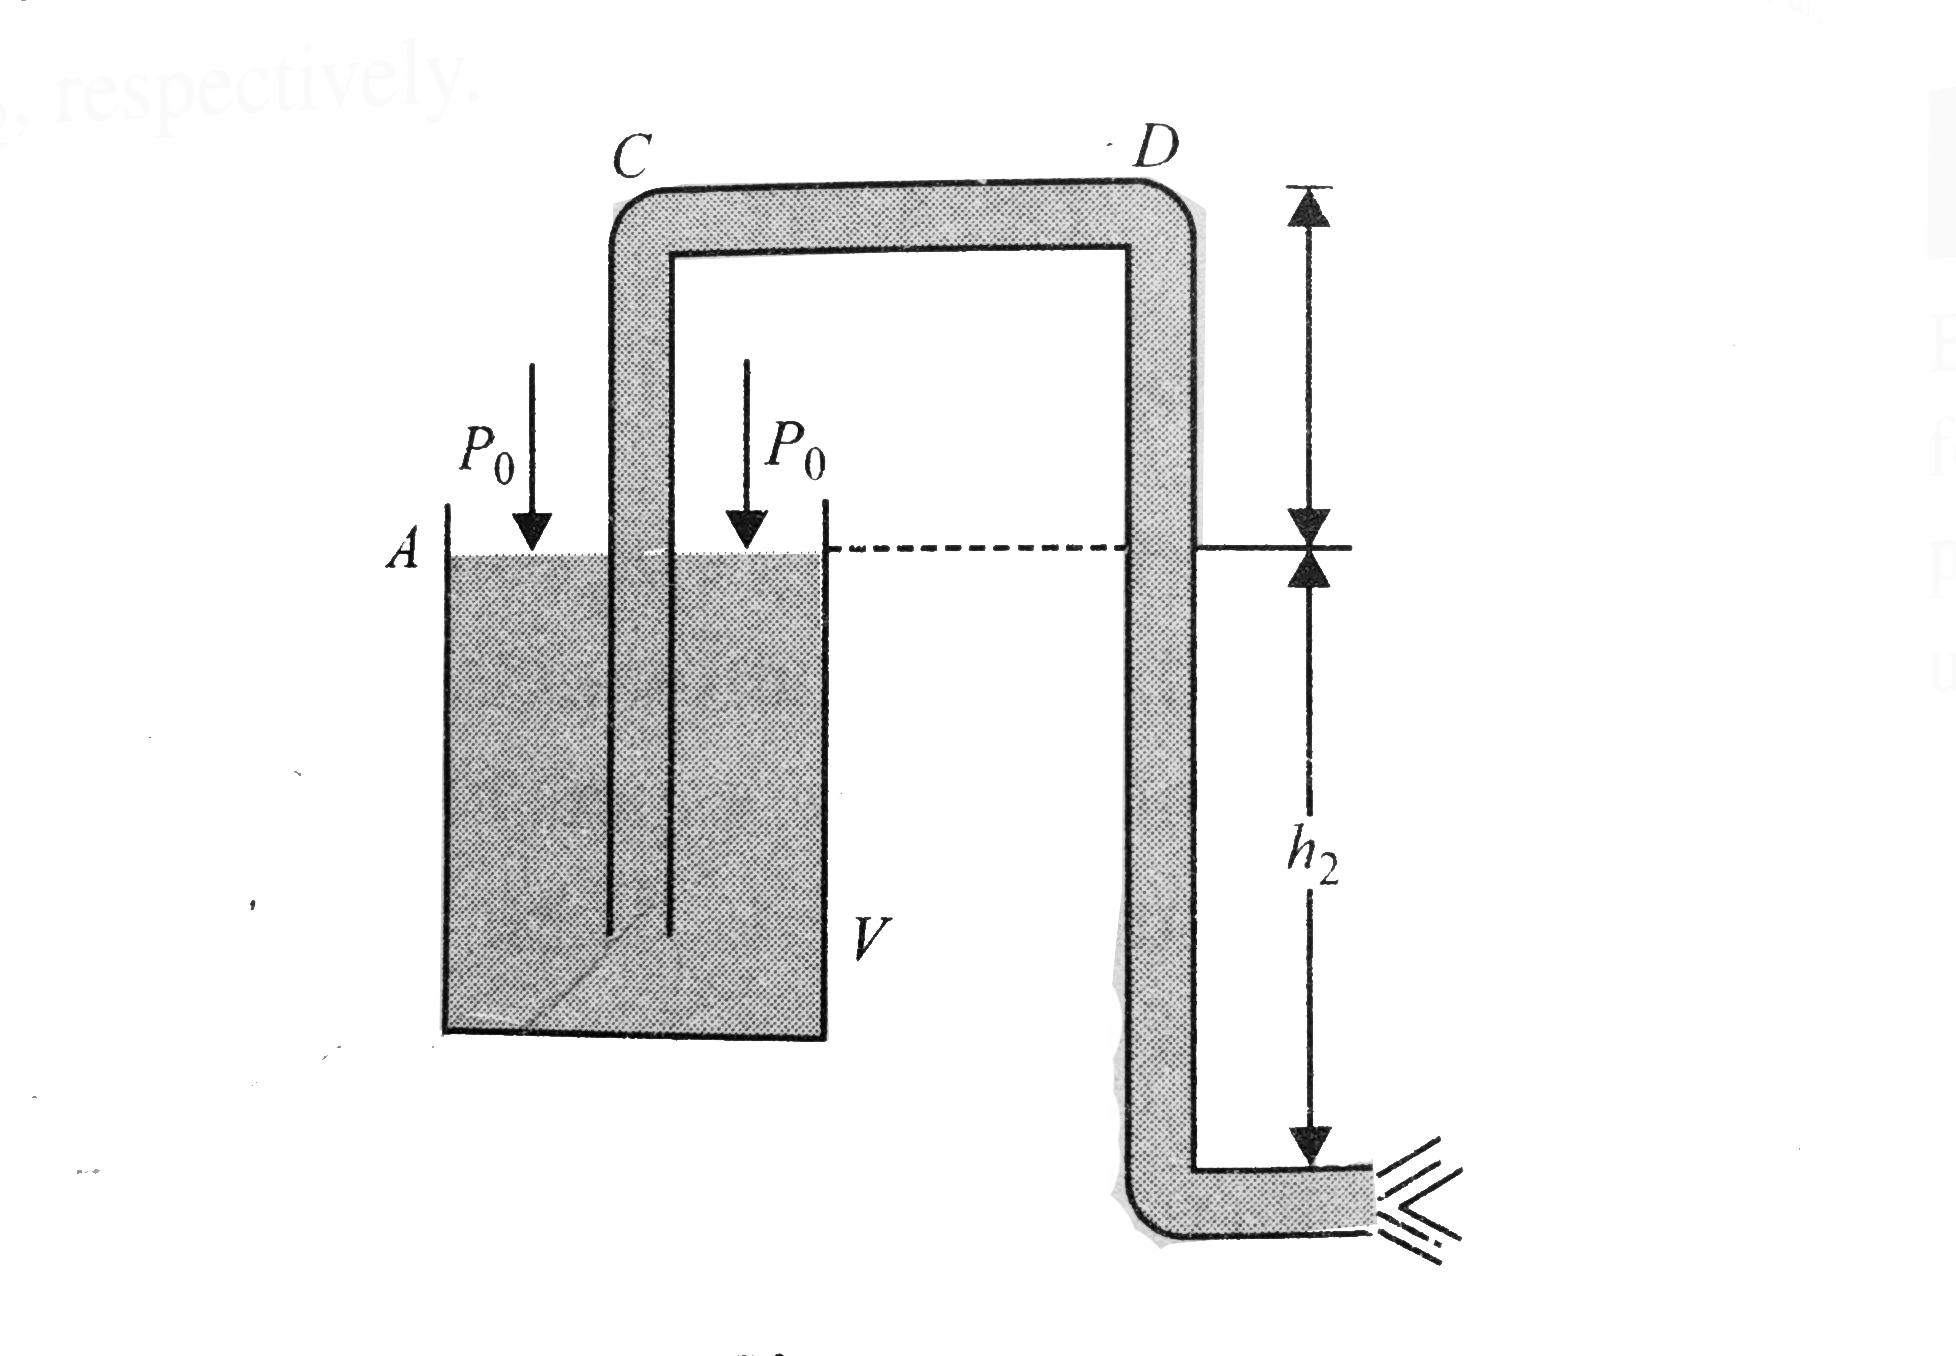 A tube of uniform cross section is used to siphon water from a vessel V as shown in the figure. The pressure over the open end of water in the vessel is atmospheric pressure (P(0)). The height of the tube above and below the water level in the vessel are h(1) and h(2), respectively.      If h(1)=h(2) = 3.0 m, the maximum value of h(1), for which the siphon will work will be